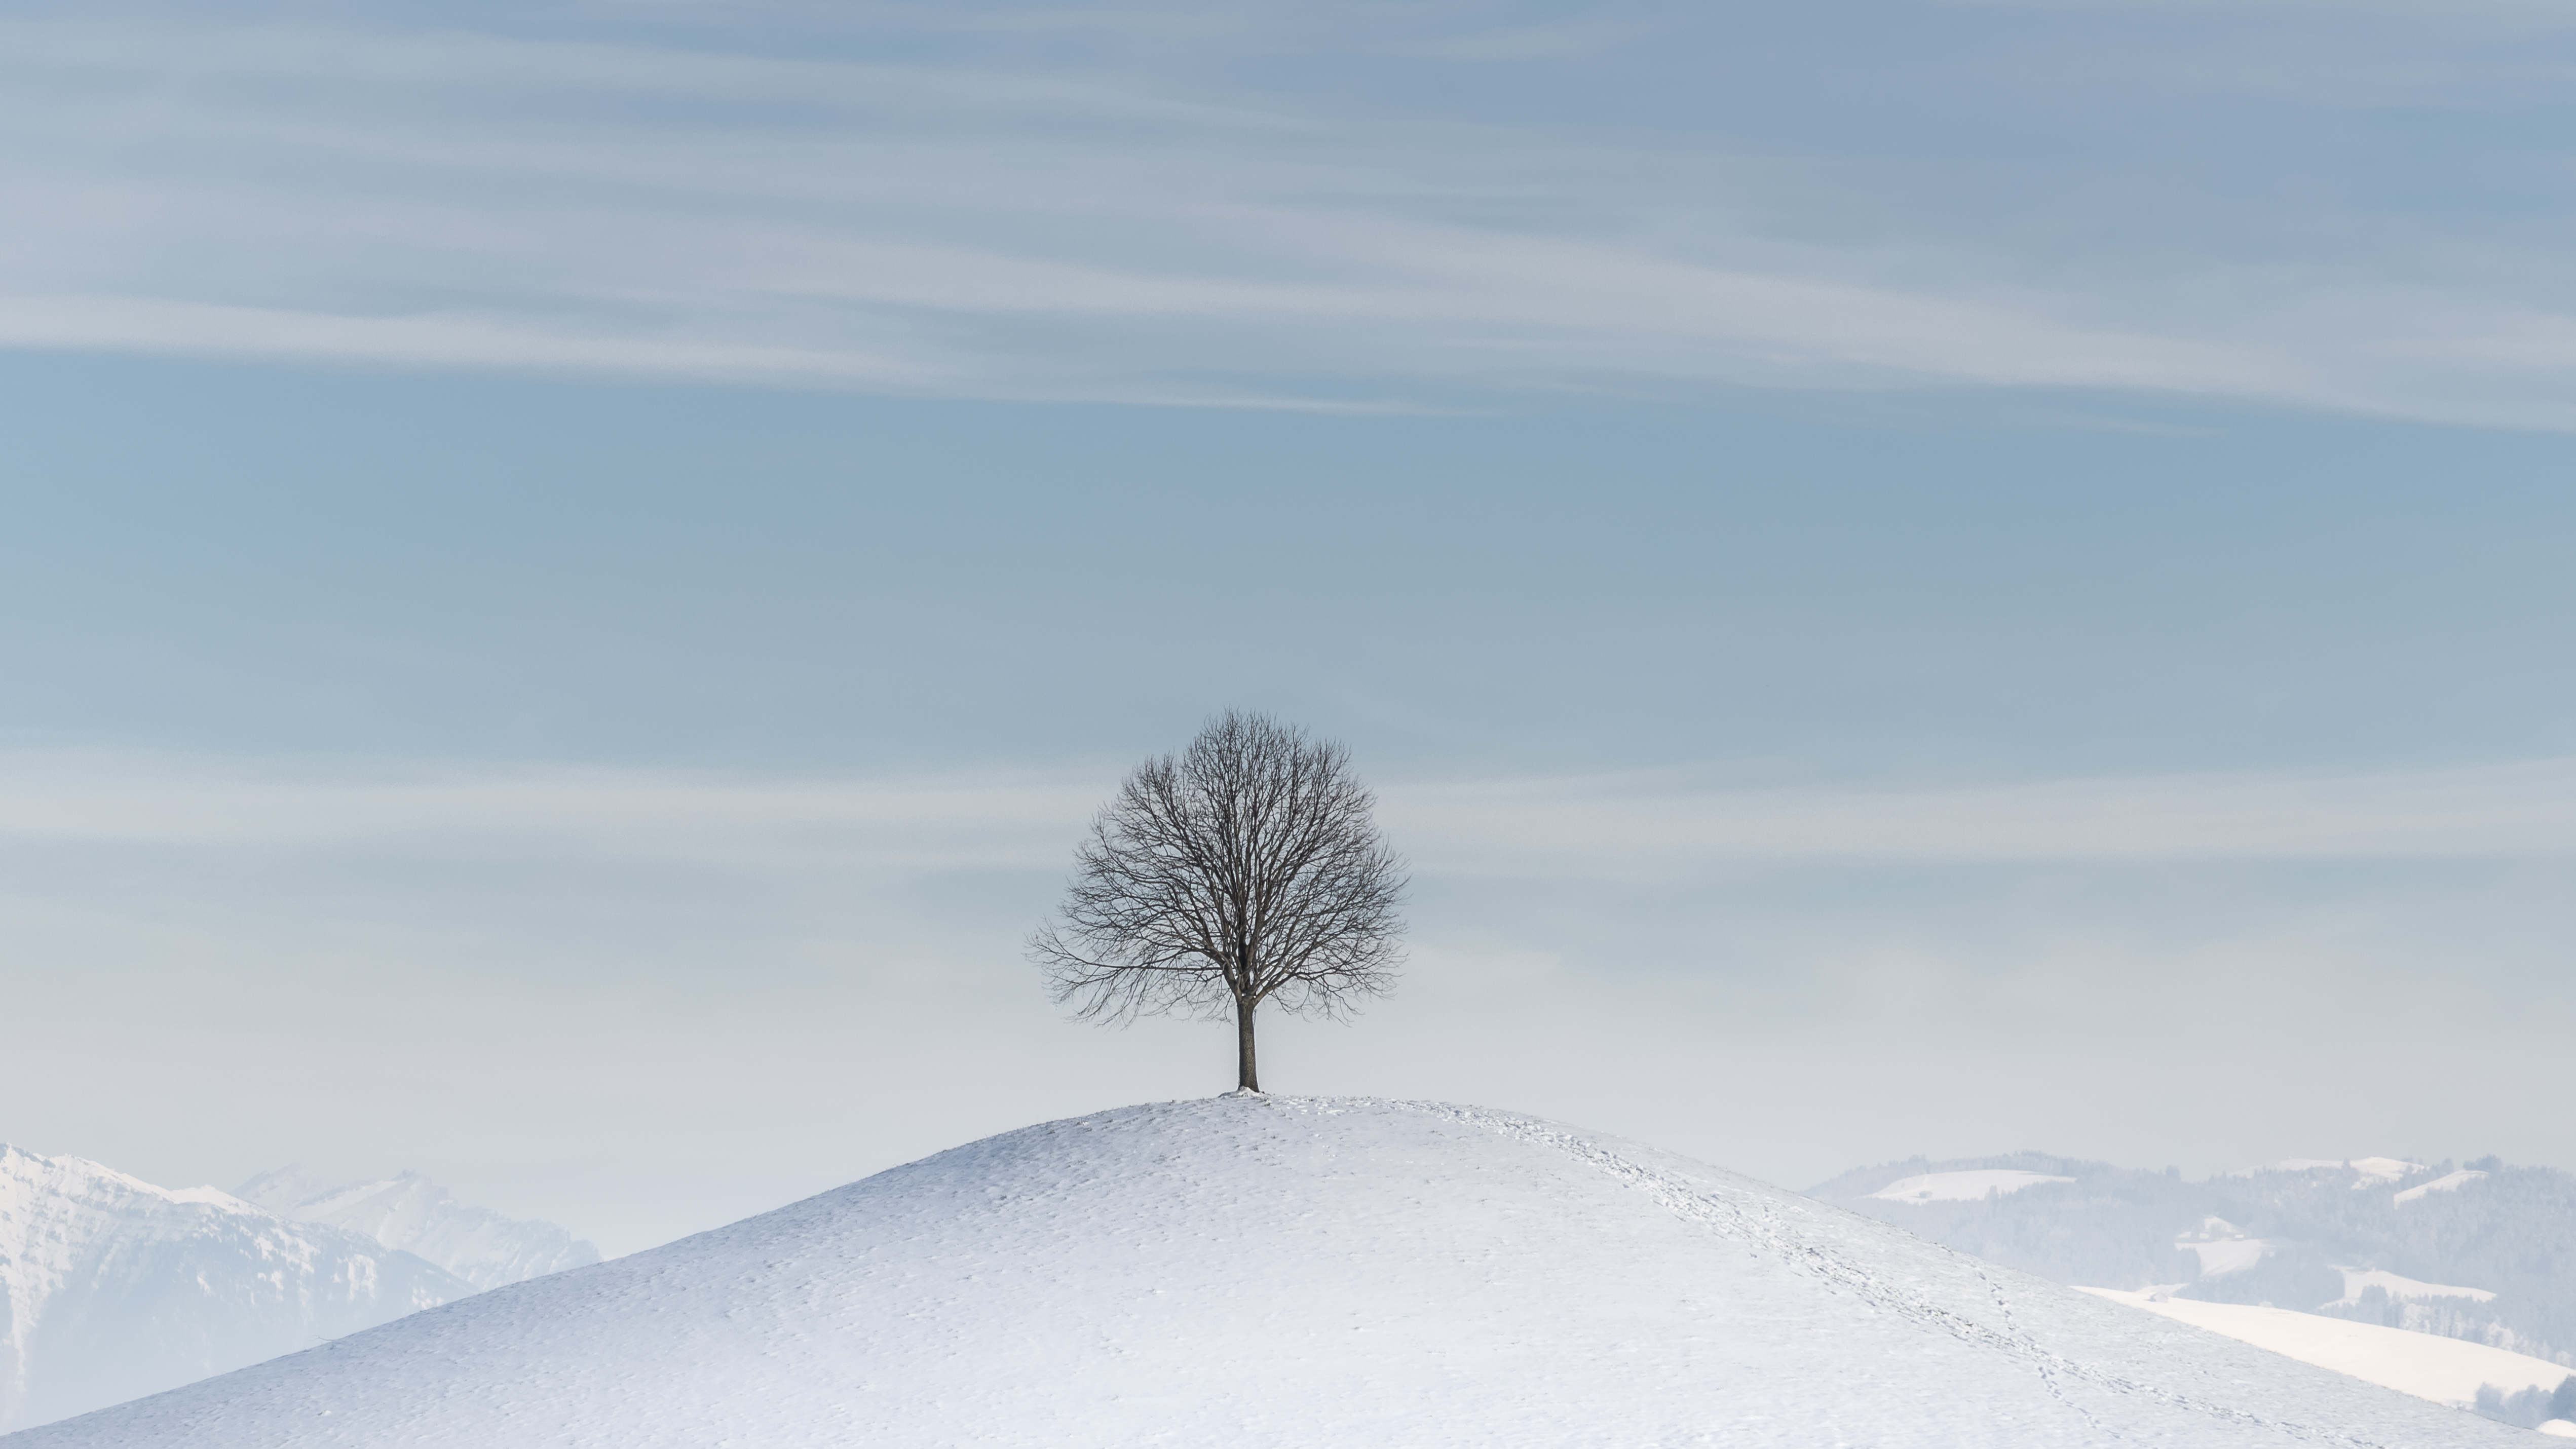 Ile winter snow wood hill tree minimalism download the picture for free